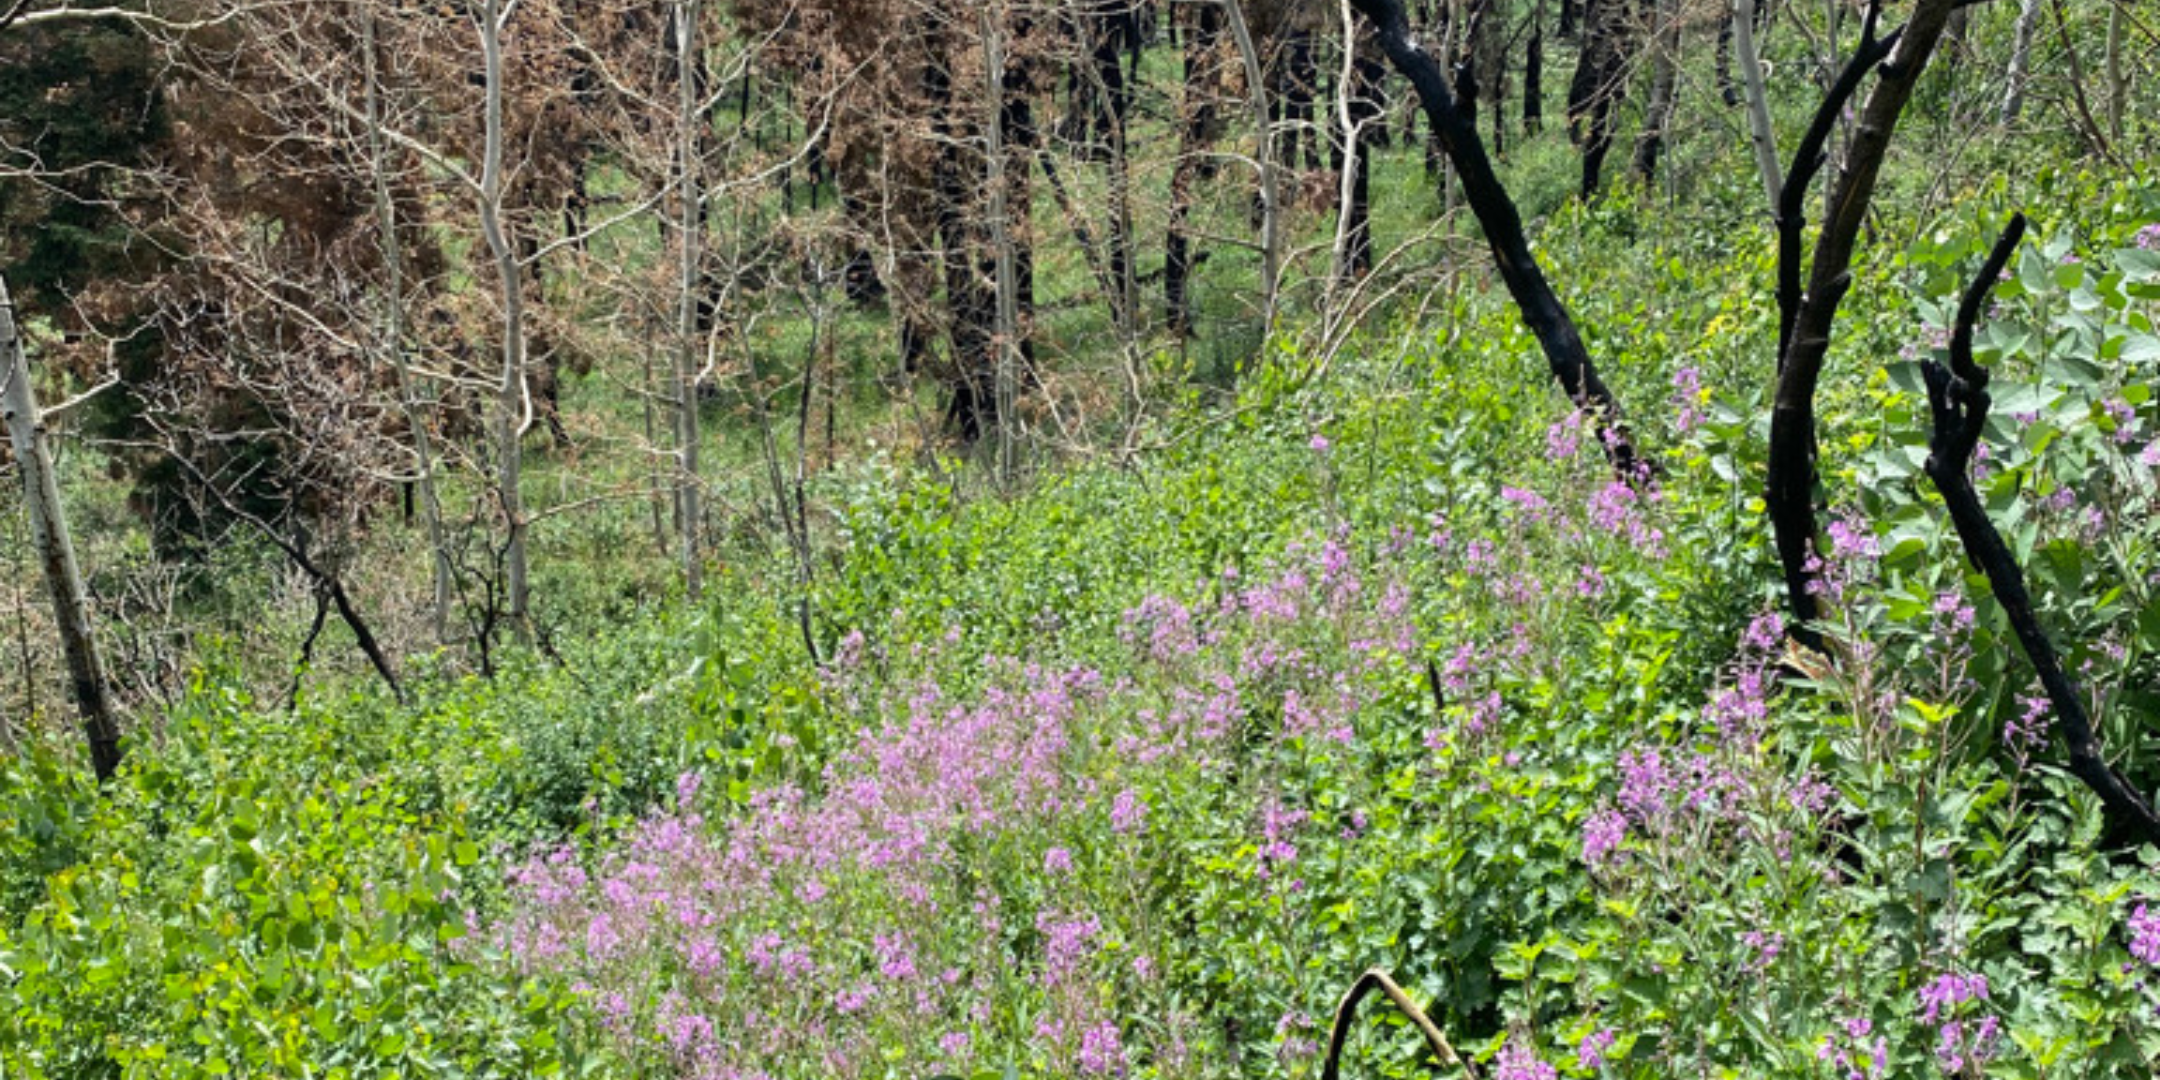 Burnt trees surrounded by new vegetation, including purple wildflowers